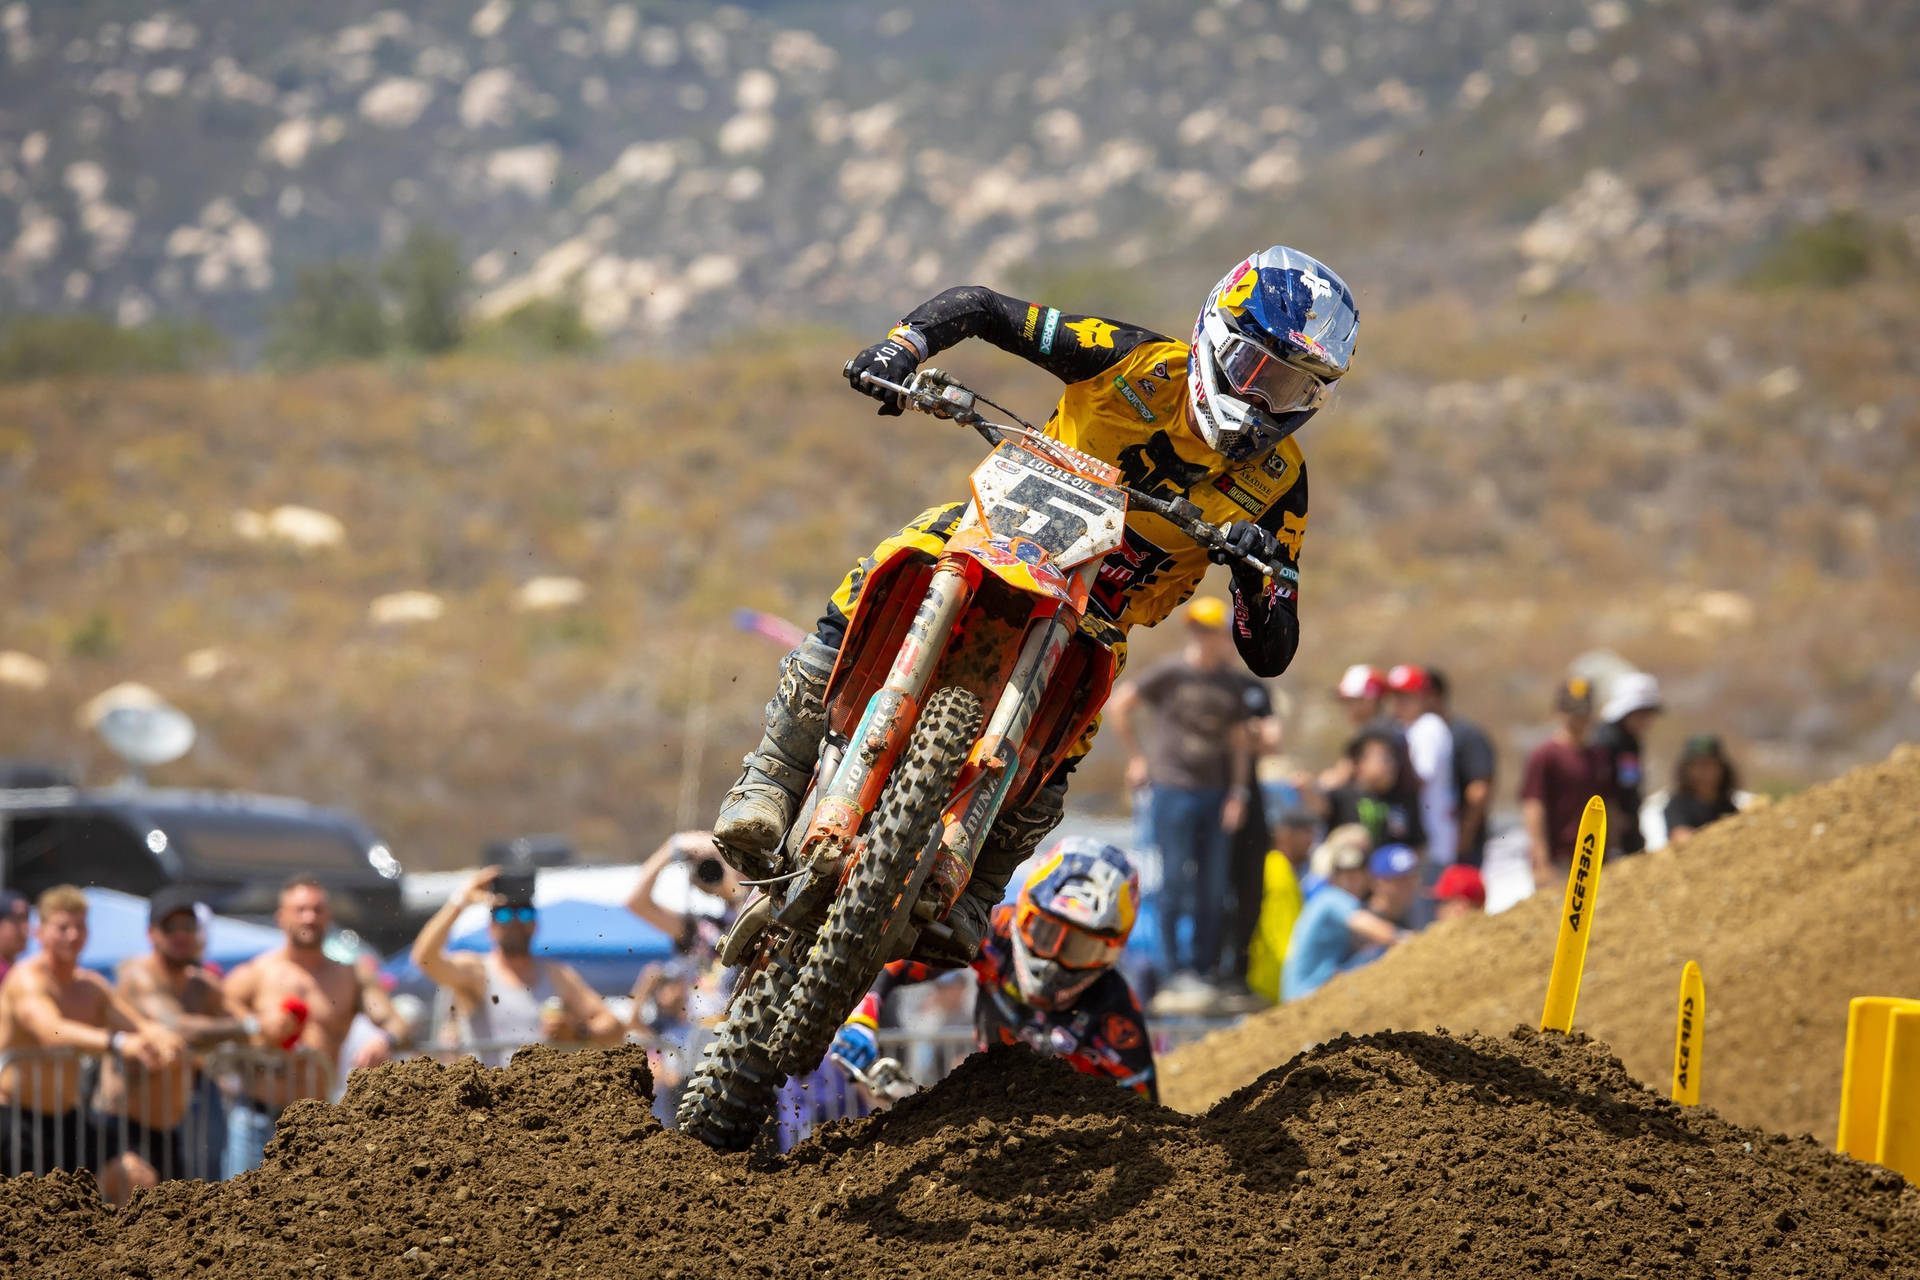 Enjoy the thrill of the ride with Fox Dirt Bike! Wallpaper